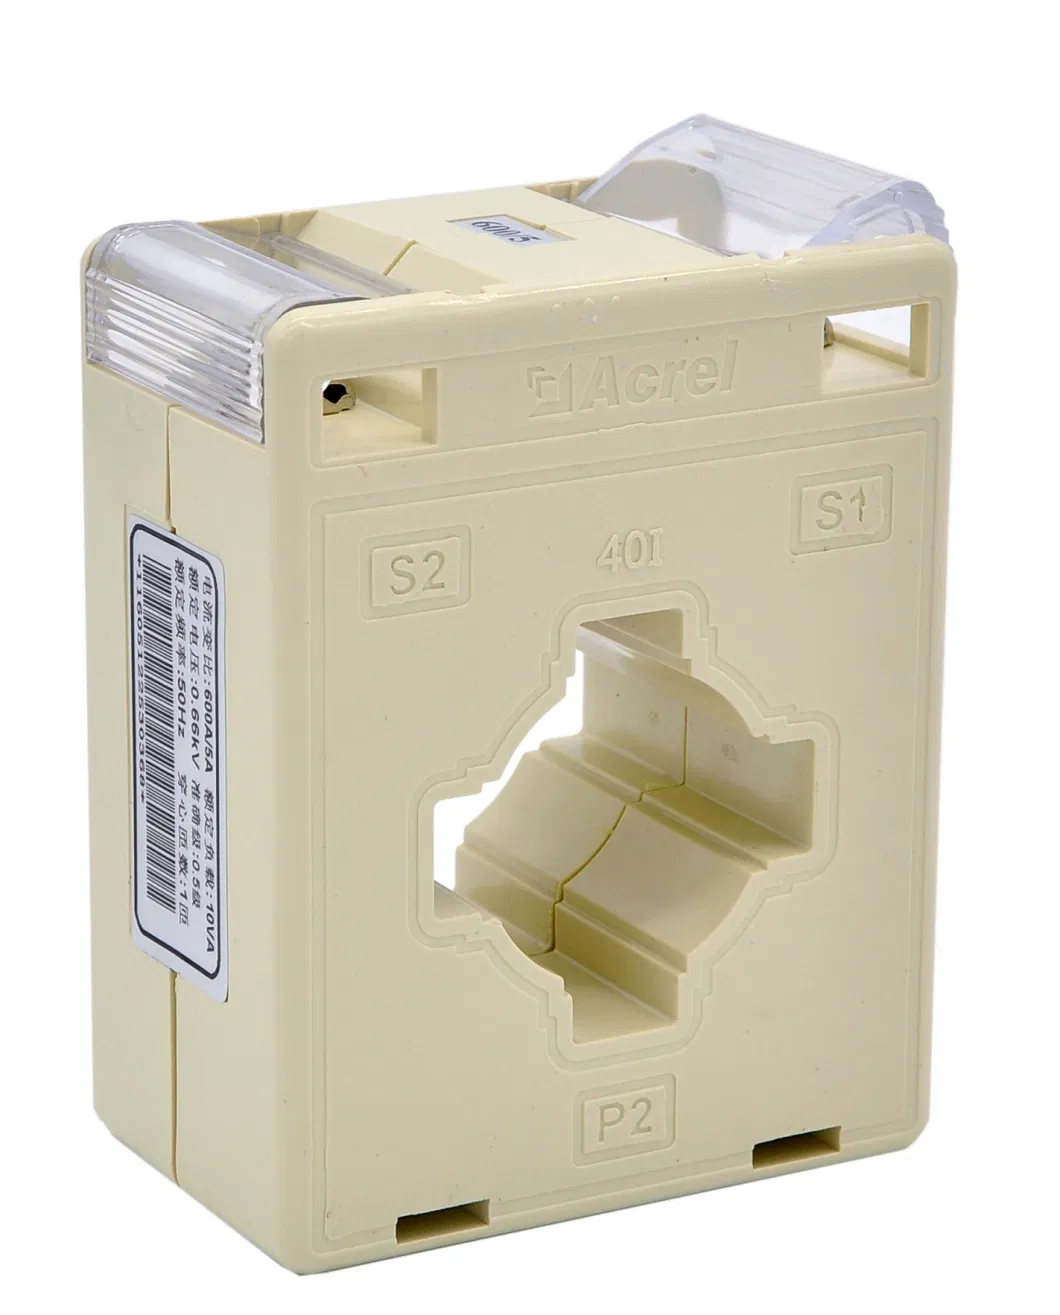 Akh-0.66/I Current Transformer Matches with Measuring Instruments with 30/5 Ratio